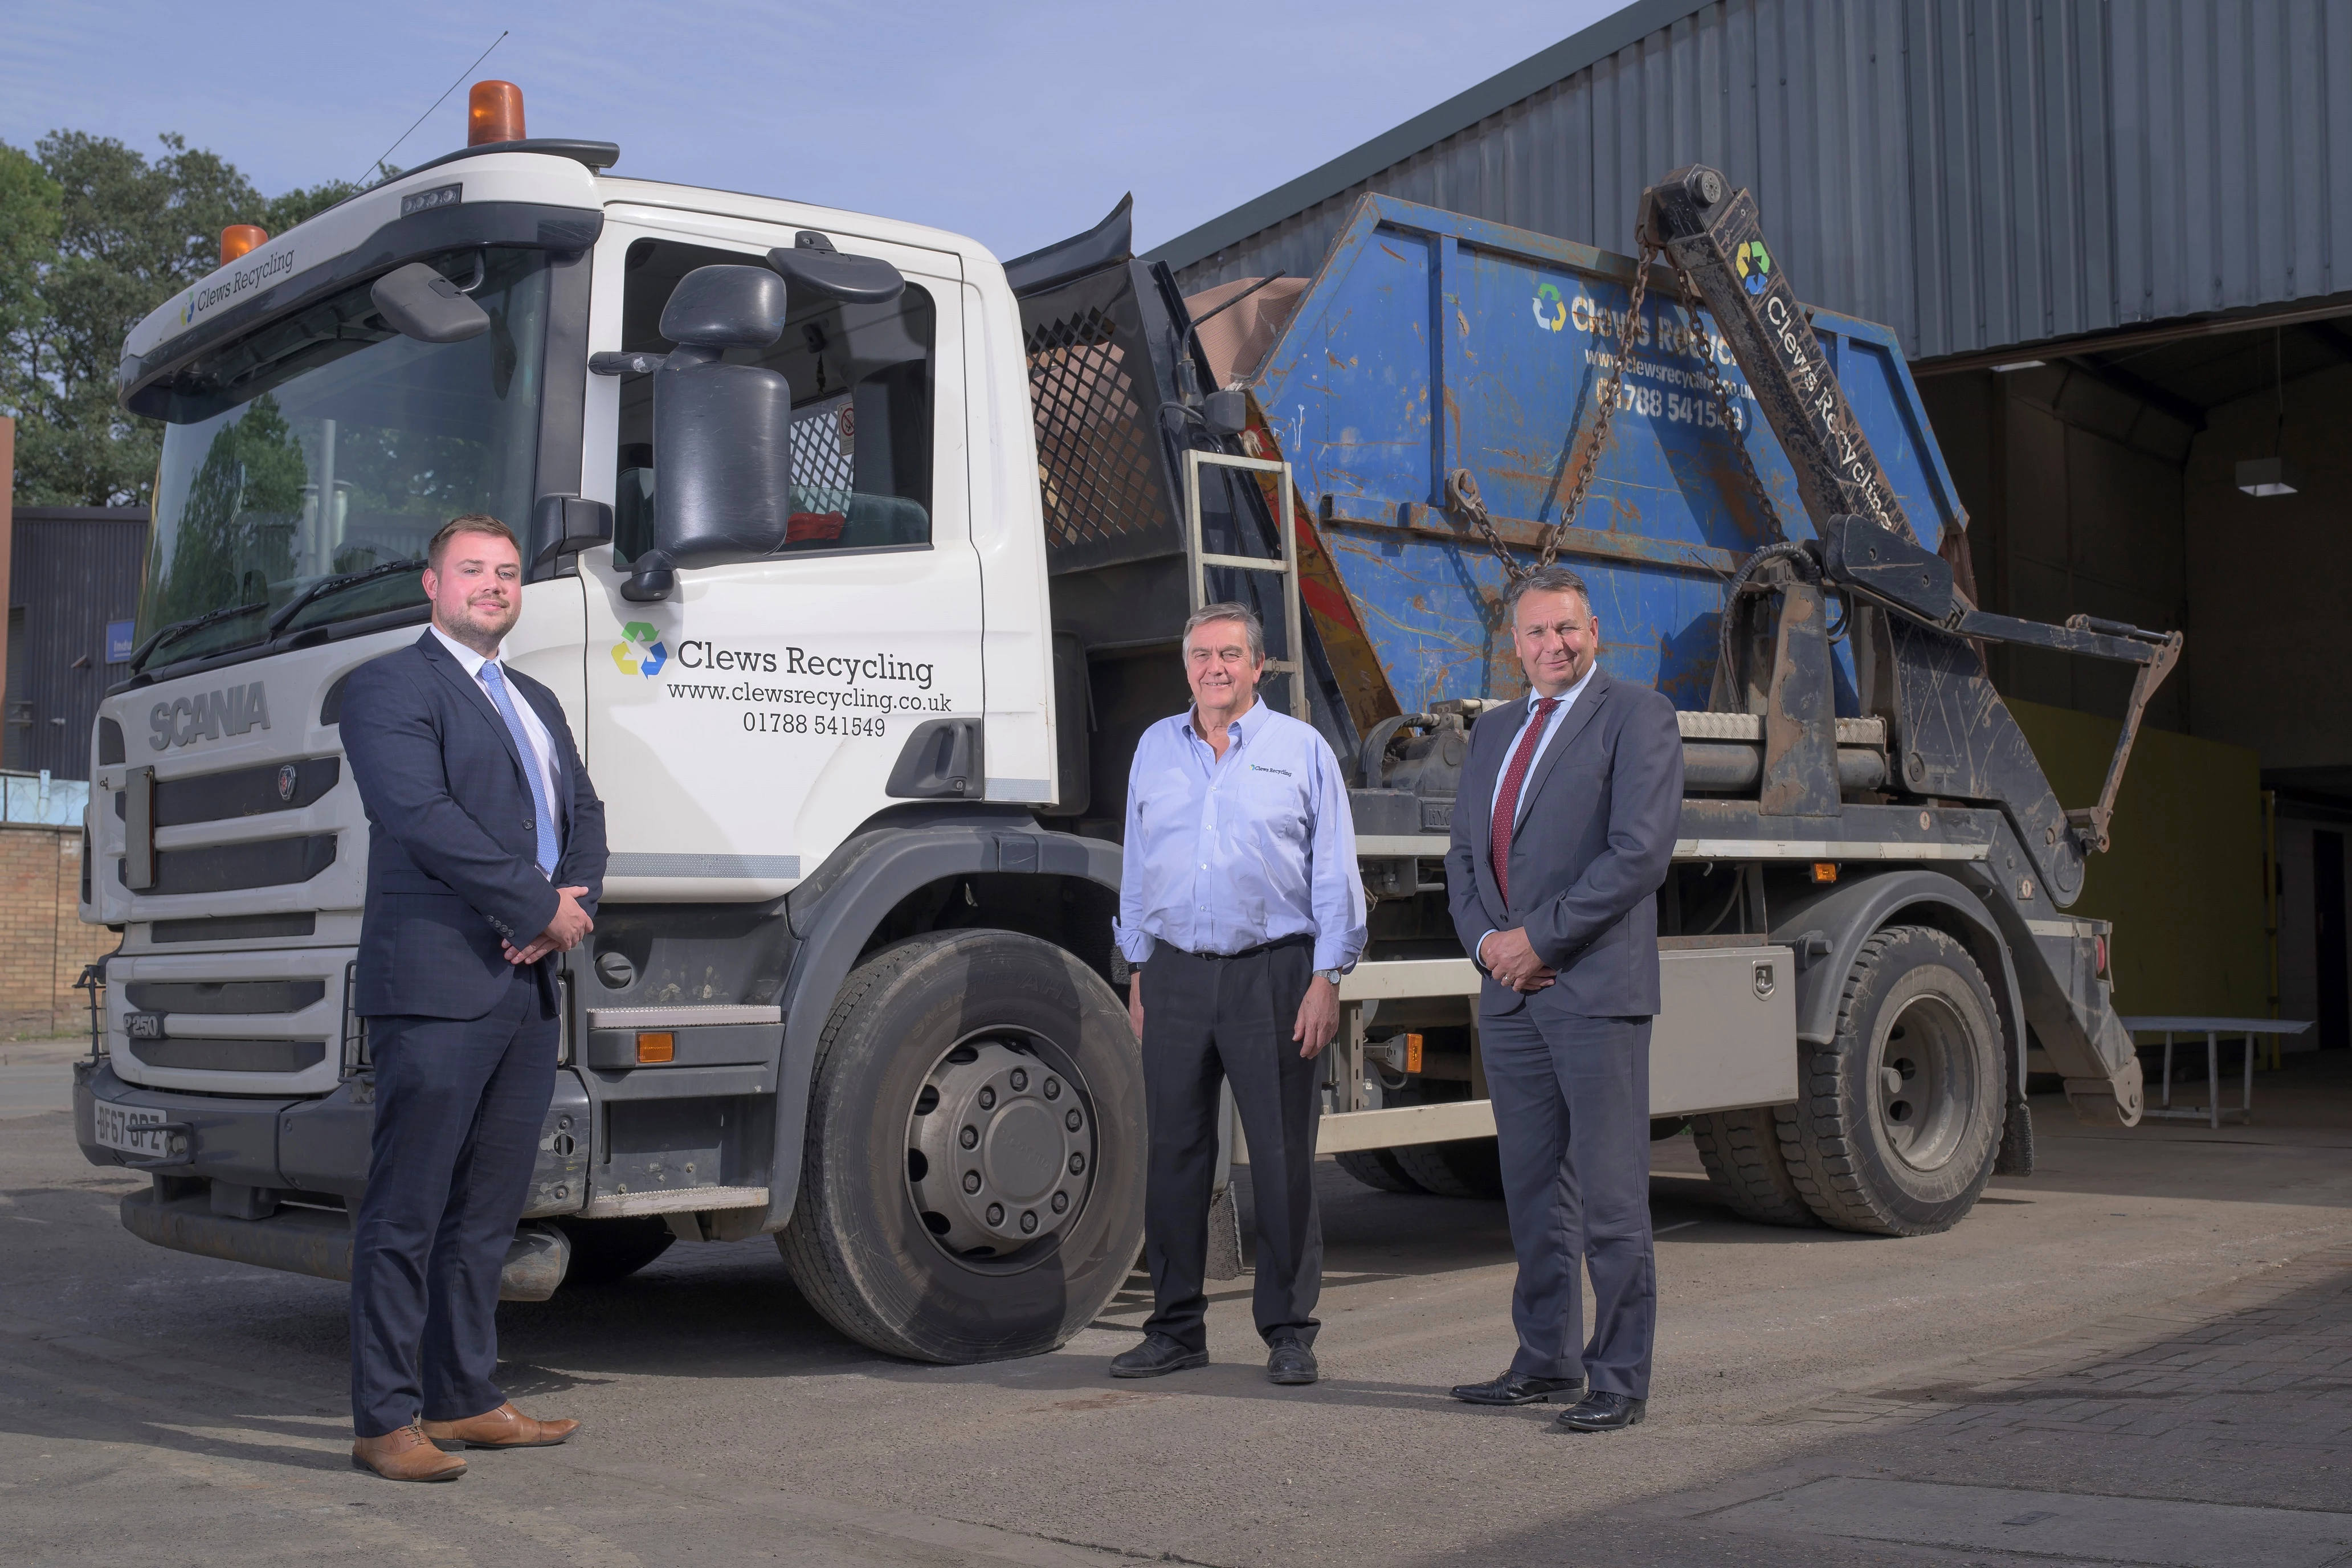 : From the left, Adam Plumb (CW Growth Hub), Richard Clews (Clews Recycling) and Craig Humphrey (CW Growth Hub)